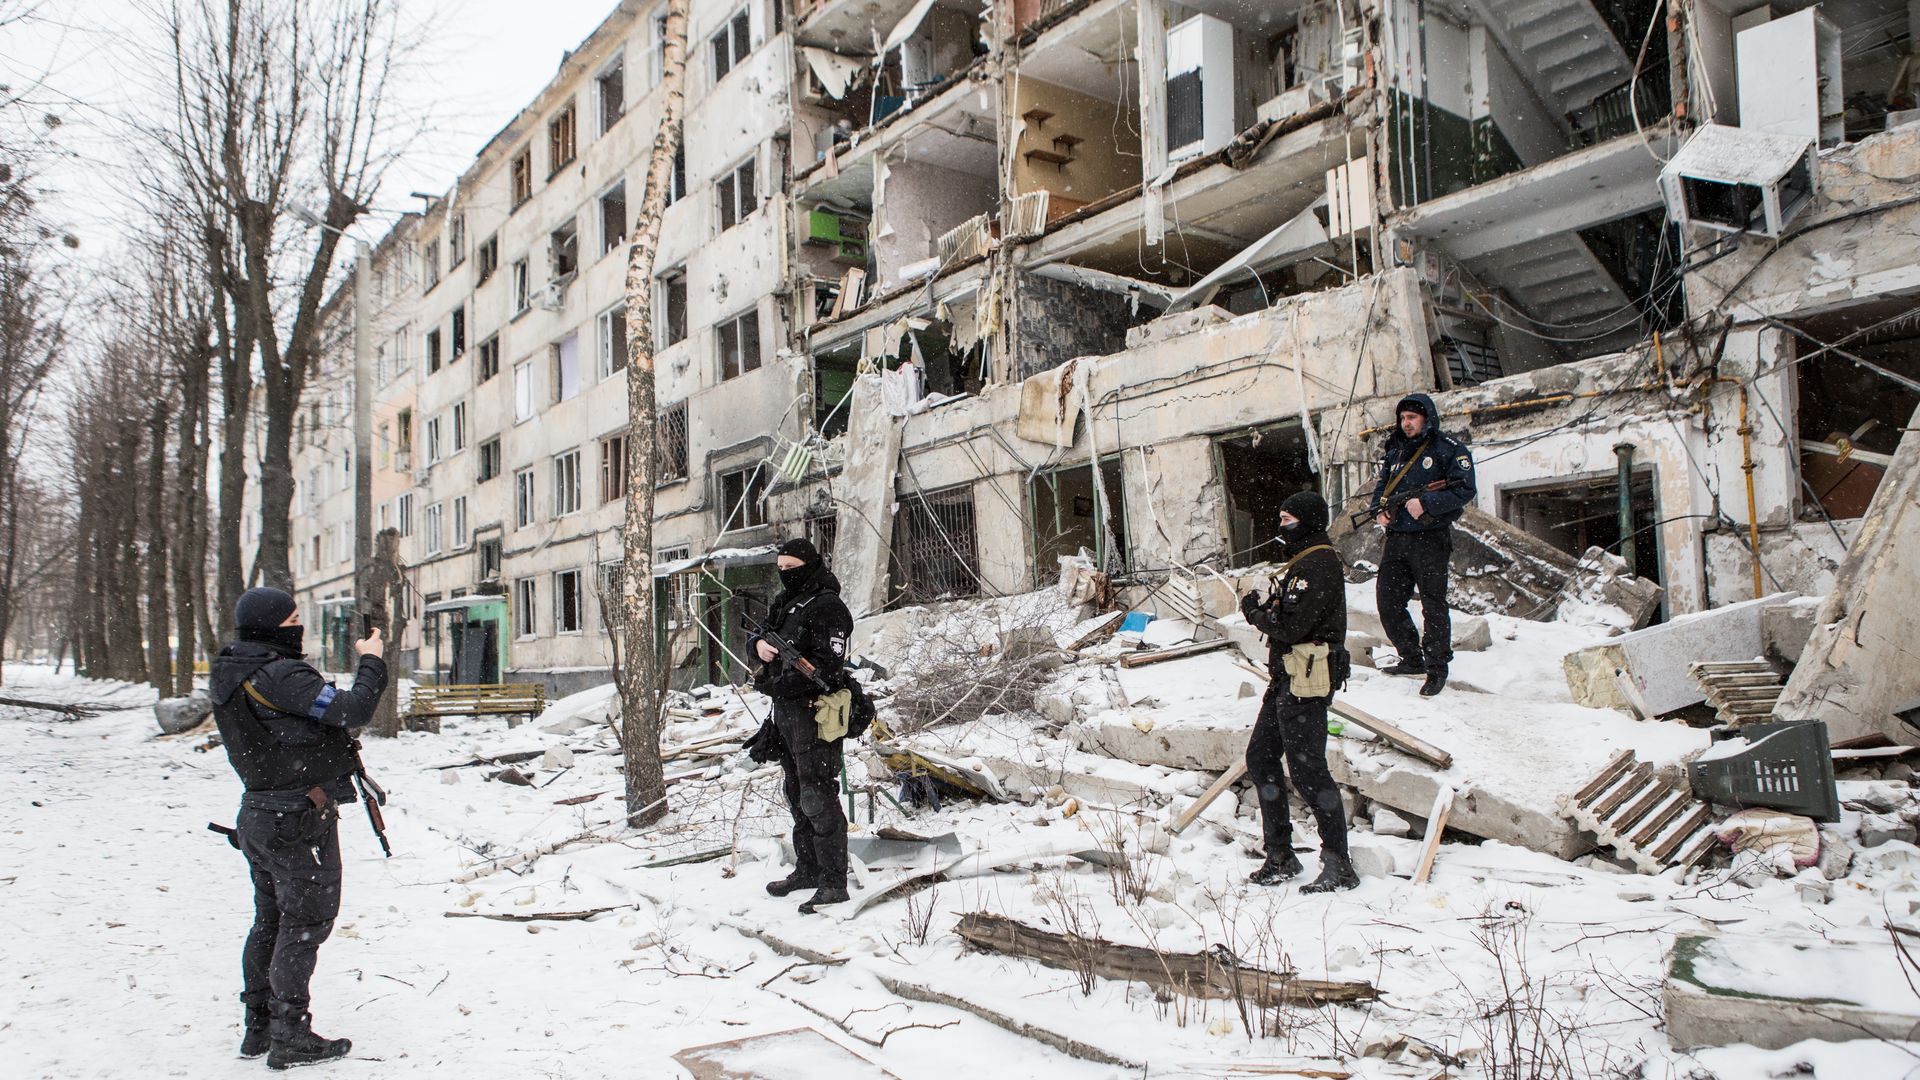 Policemen take photos of themselves in front of the bombed building in Kharkiv, Ukraine on March 10.